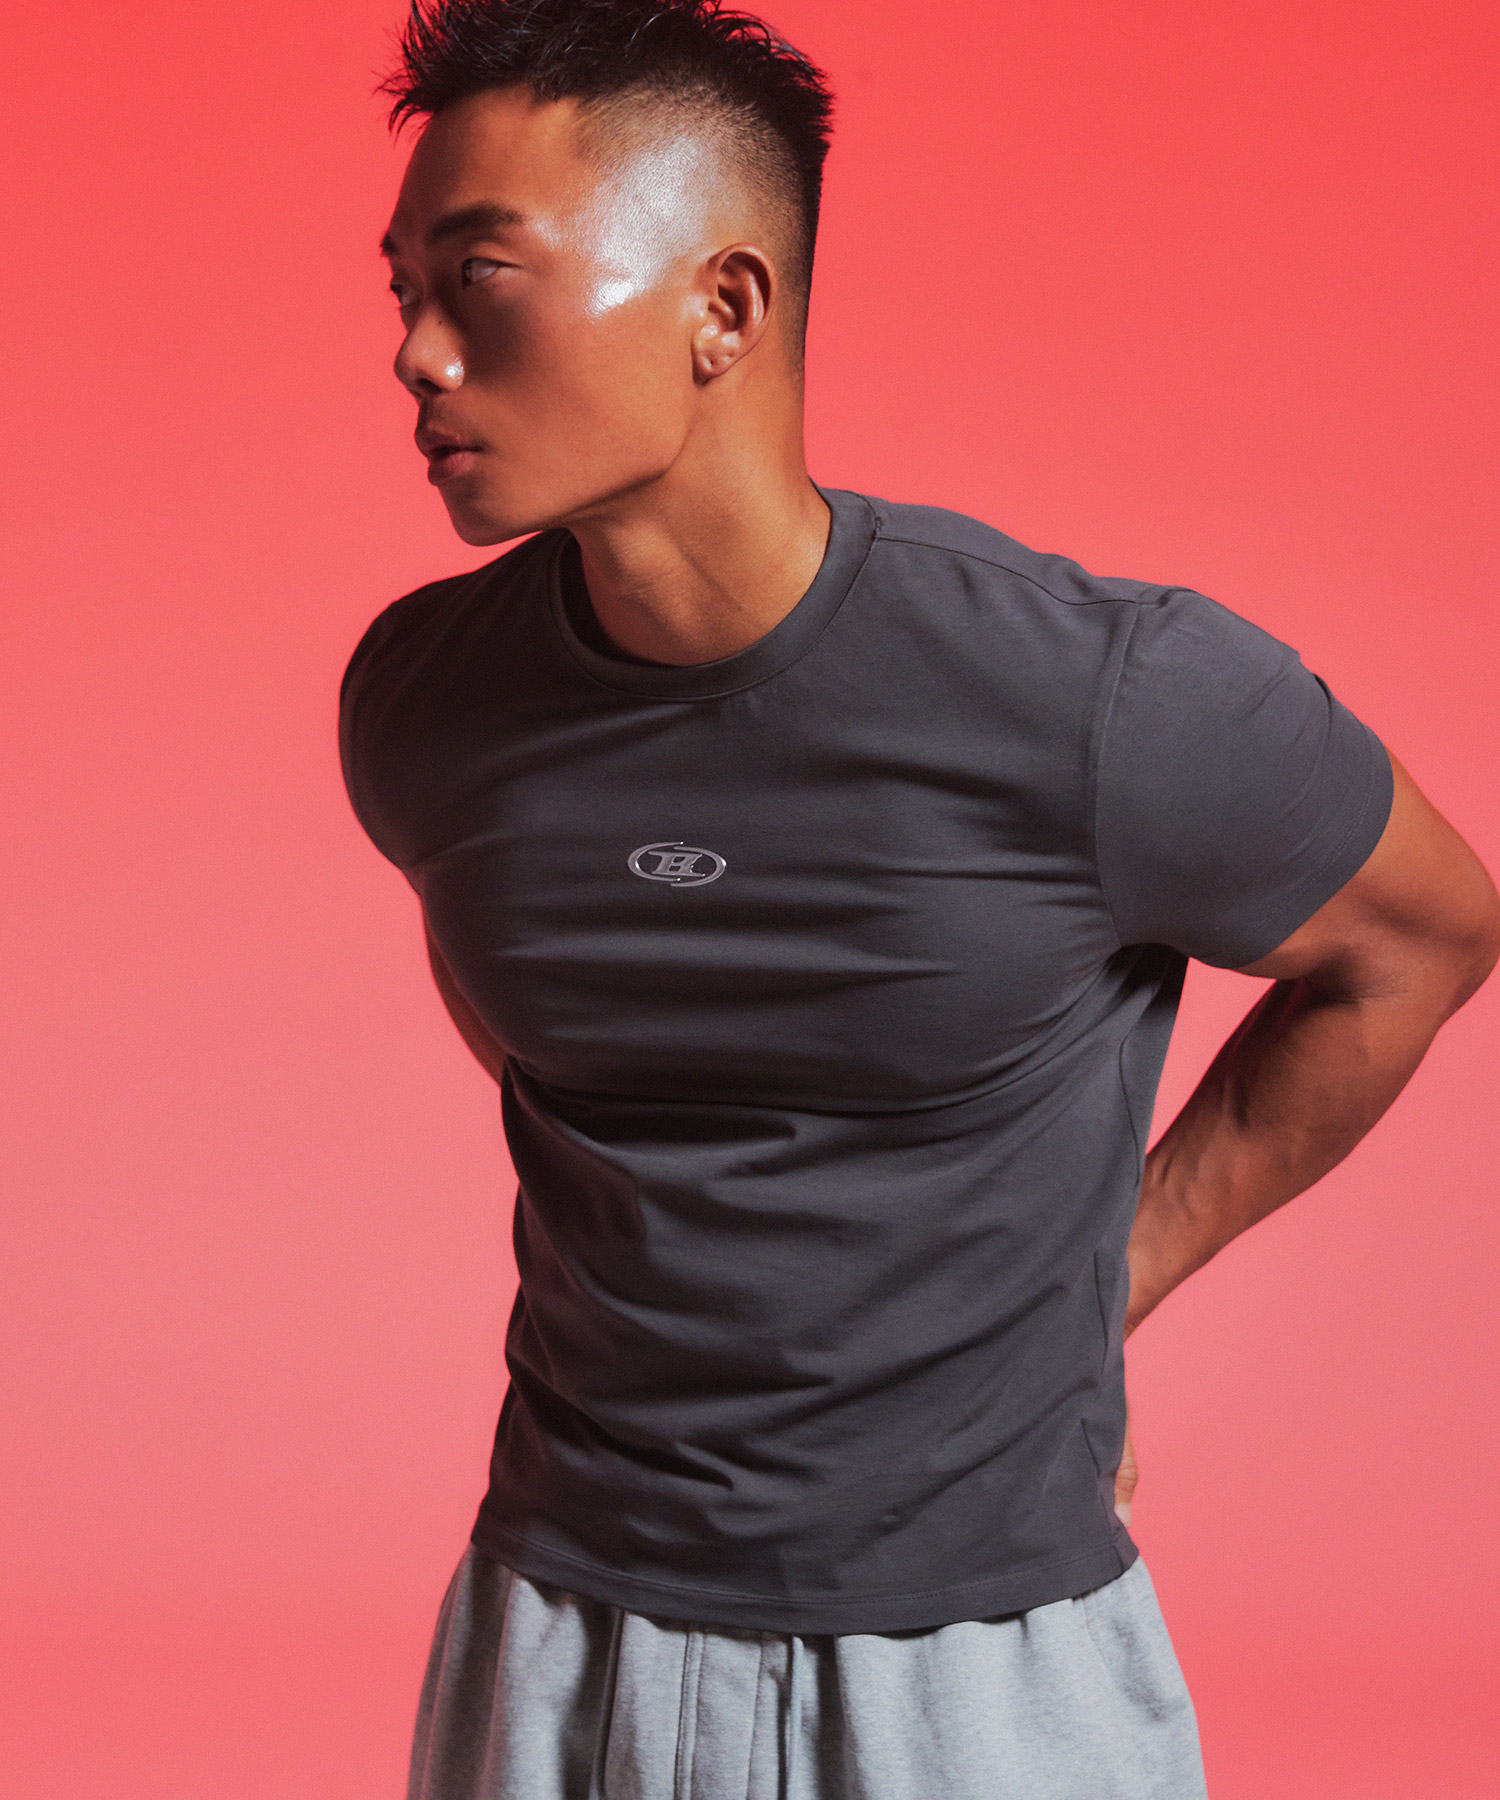 SILVER B LOGO MUSCLE FIT T-SHIRTS [CHARCOAL]